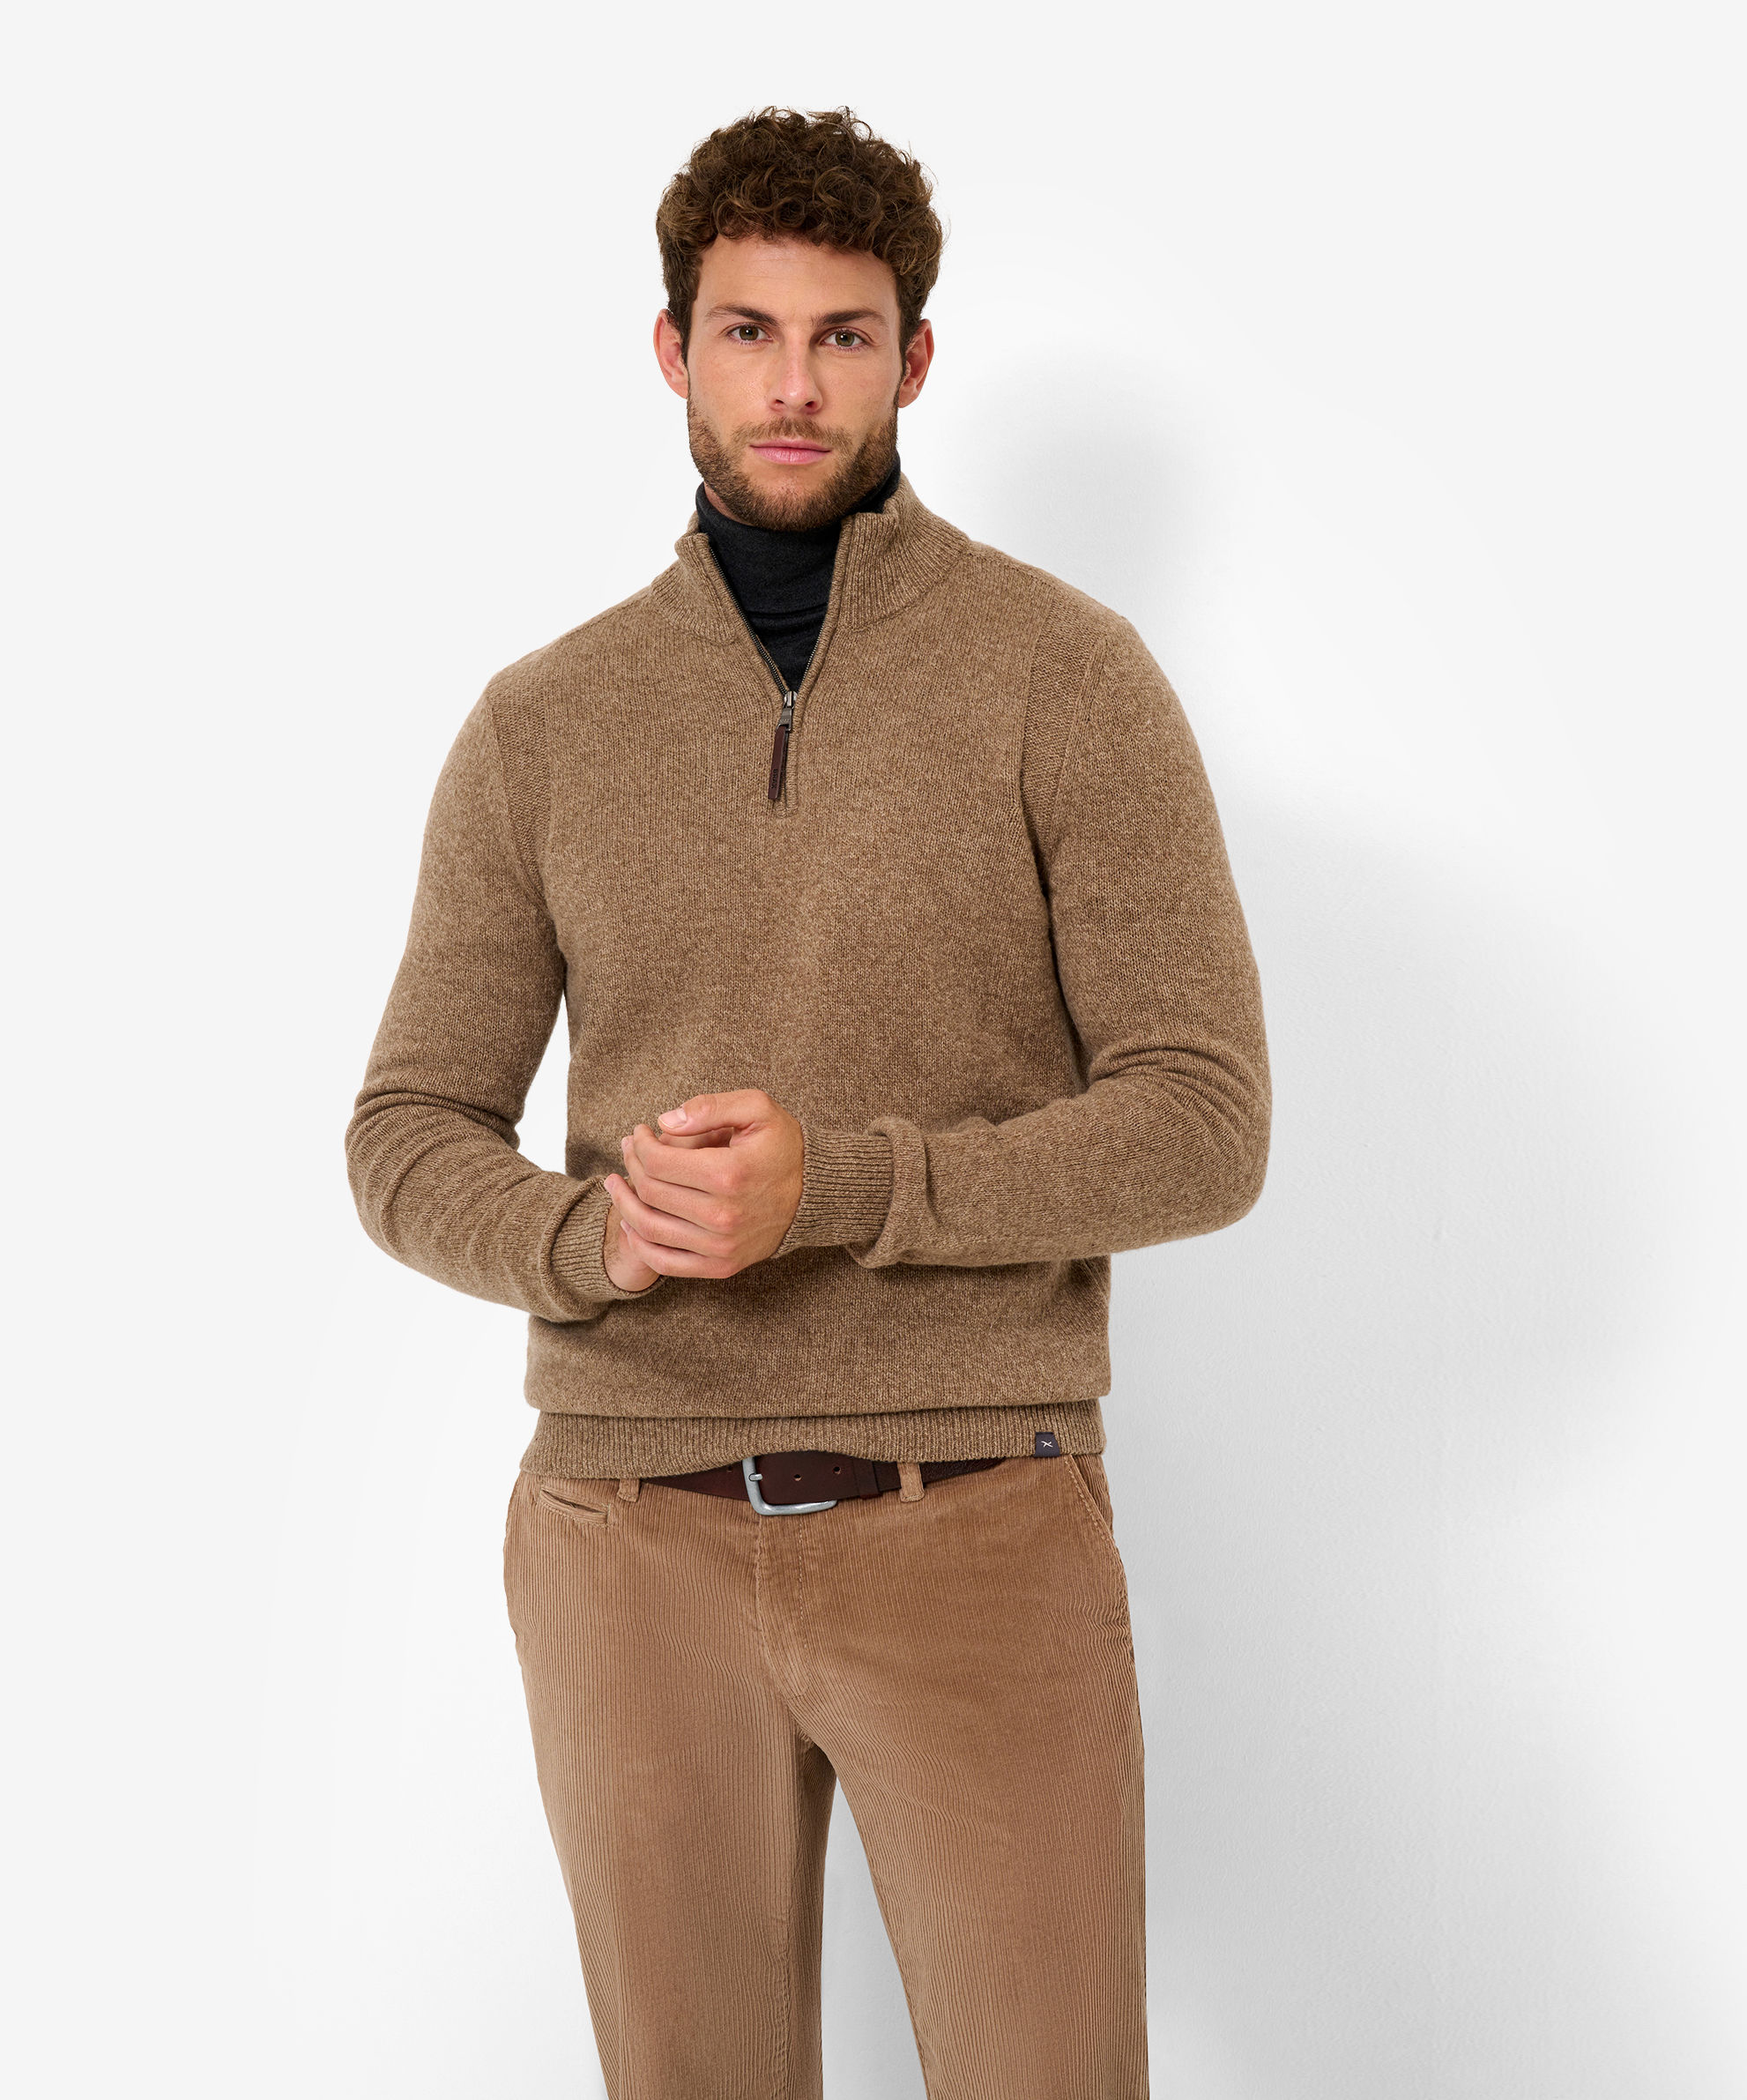 Lambswool Pullover